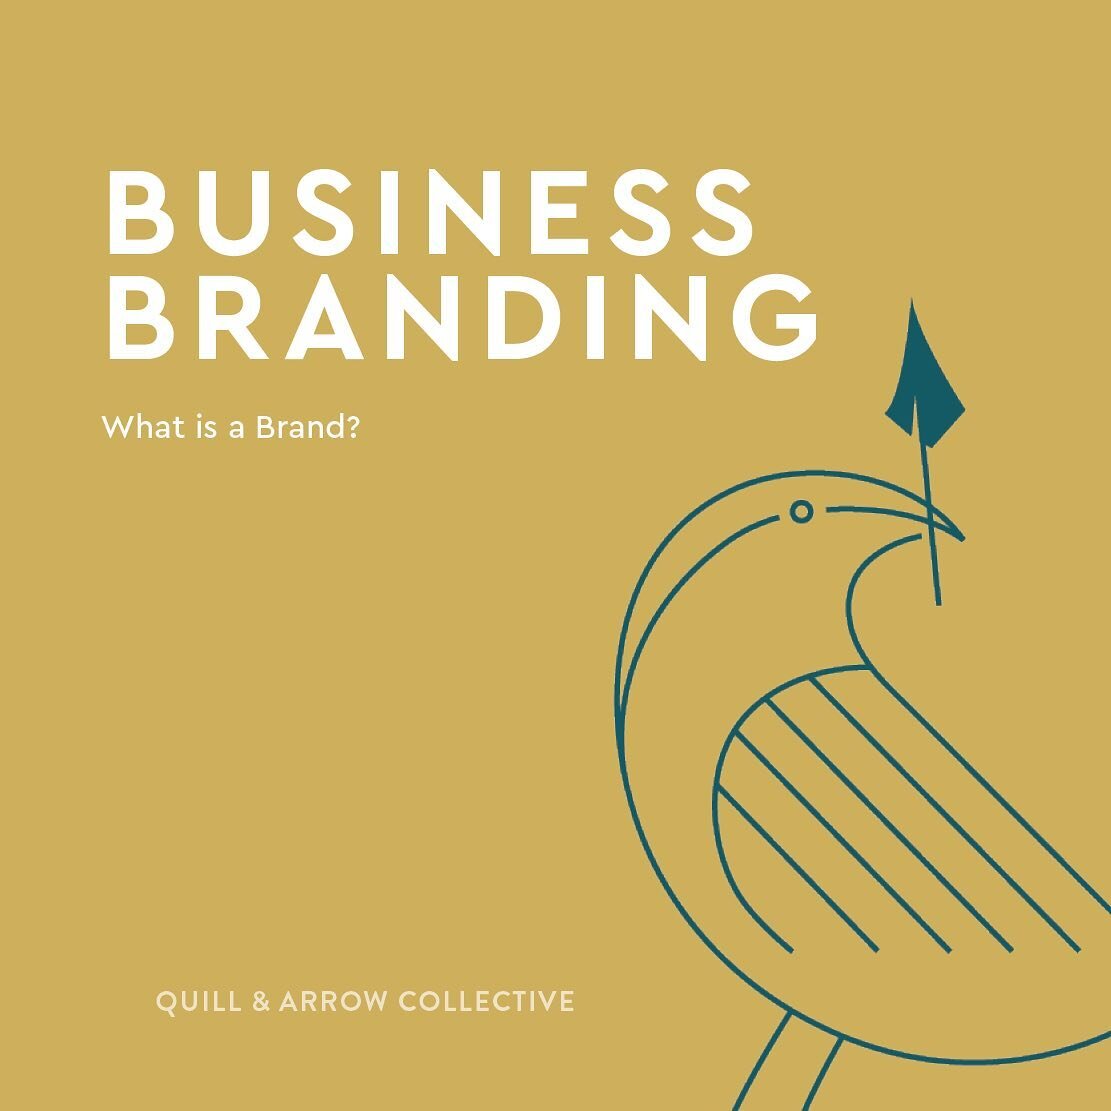 Branding is more than just a logo. It's the overall story that is created through the chosen colour, the typeface, the elements and the tone of voice you use.

Creating and developing a brand is about seeing the bigger picture beyond the logo, unlock